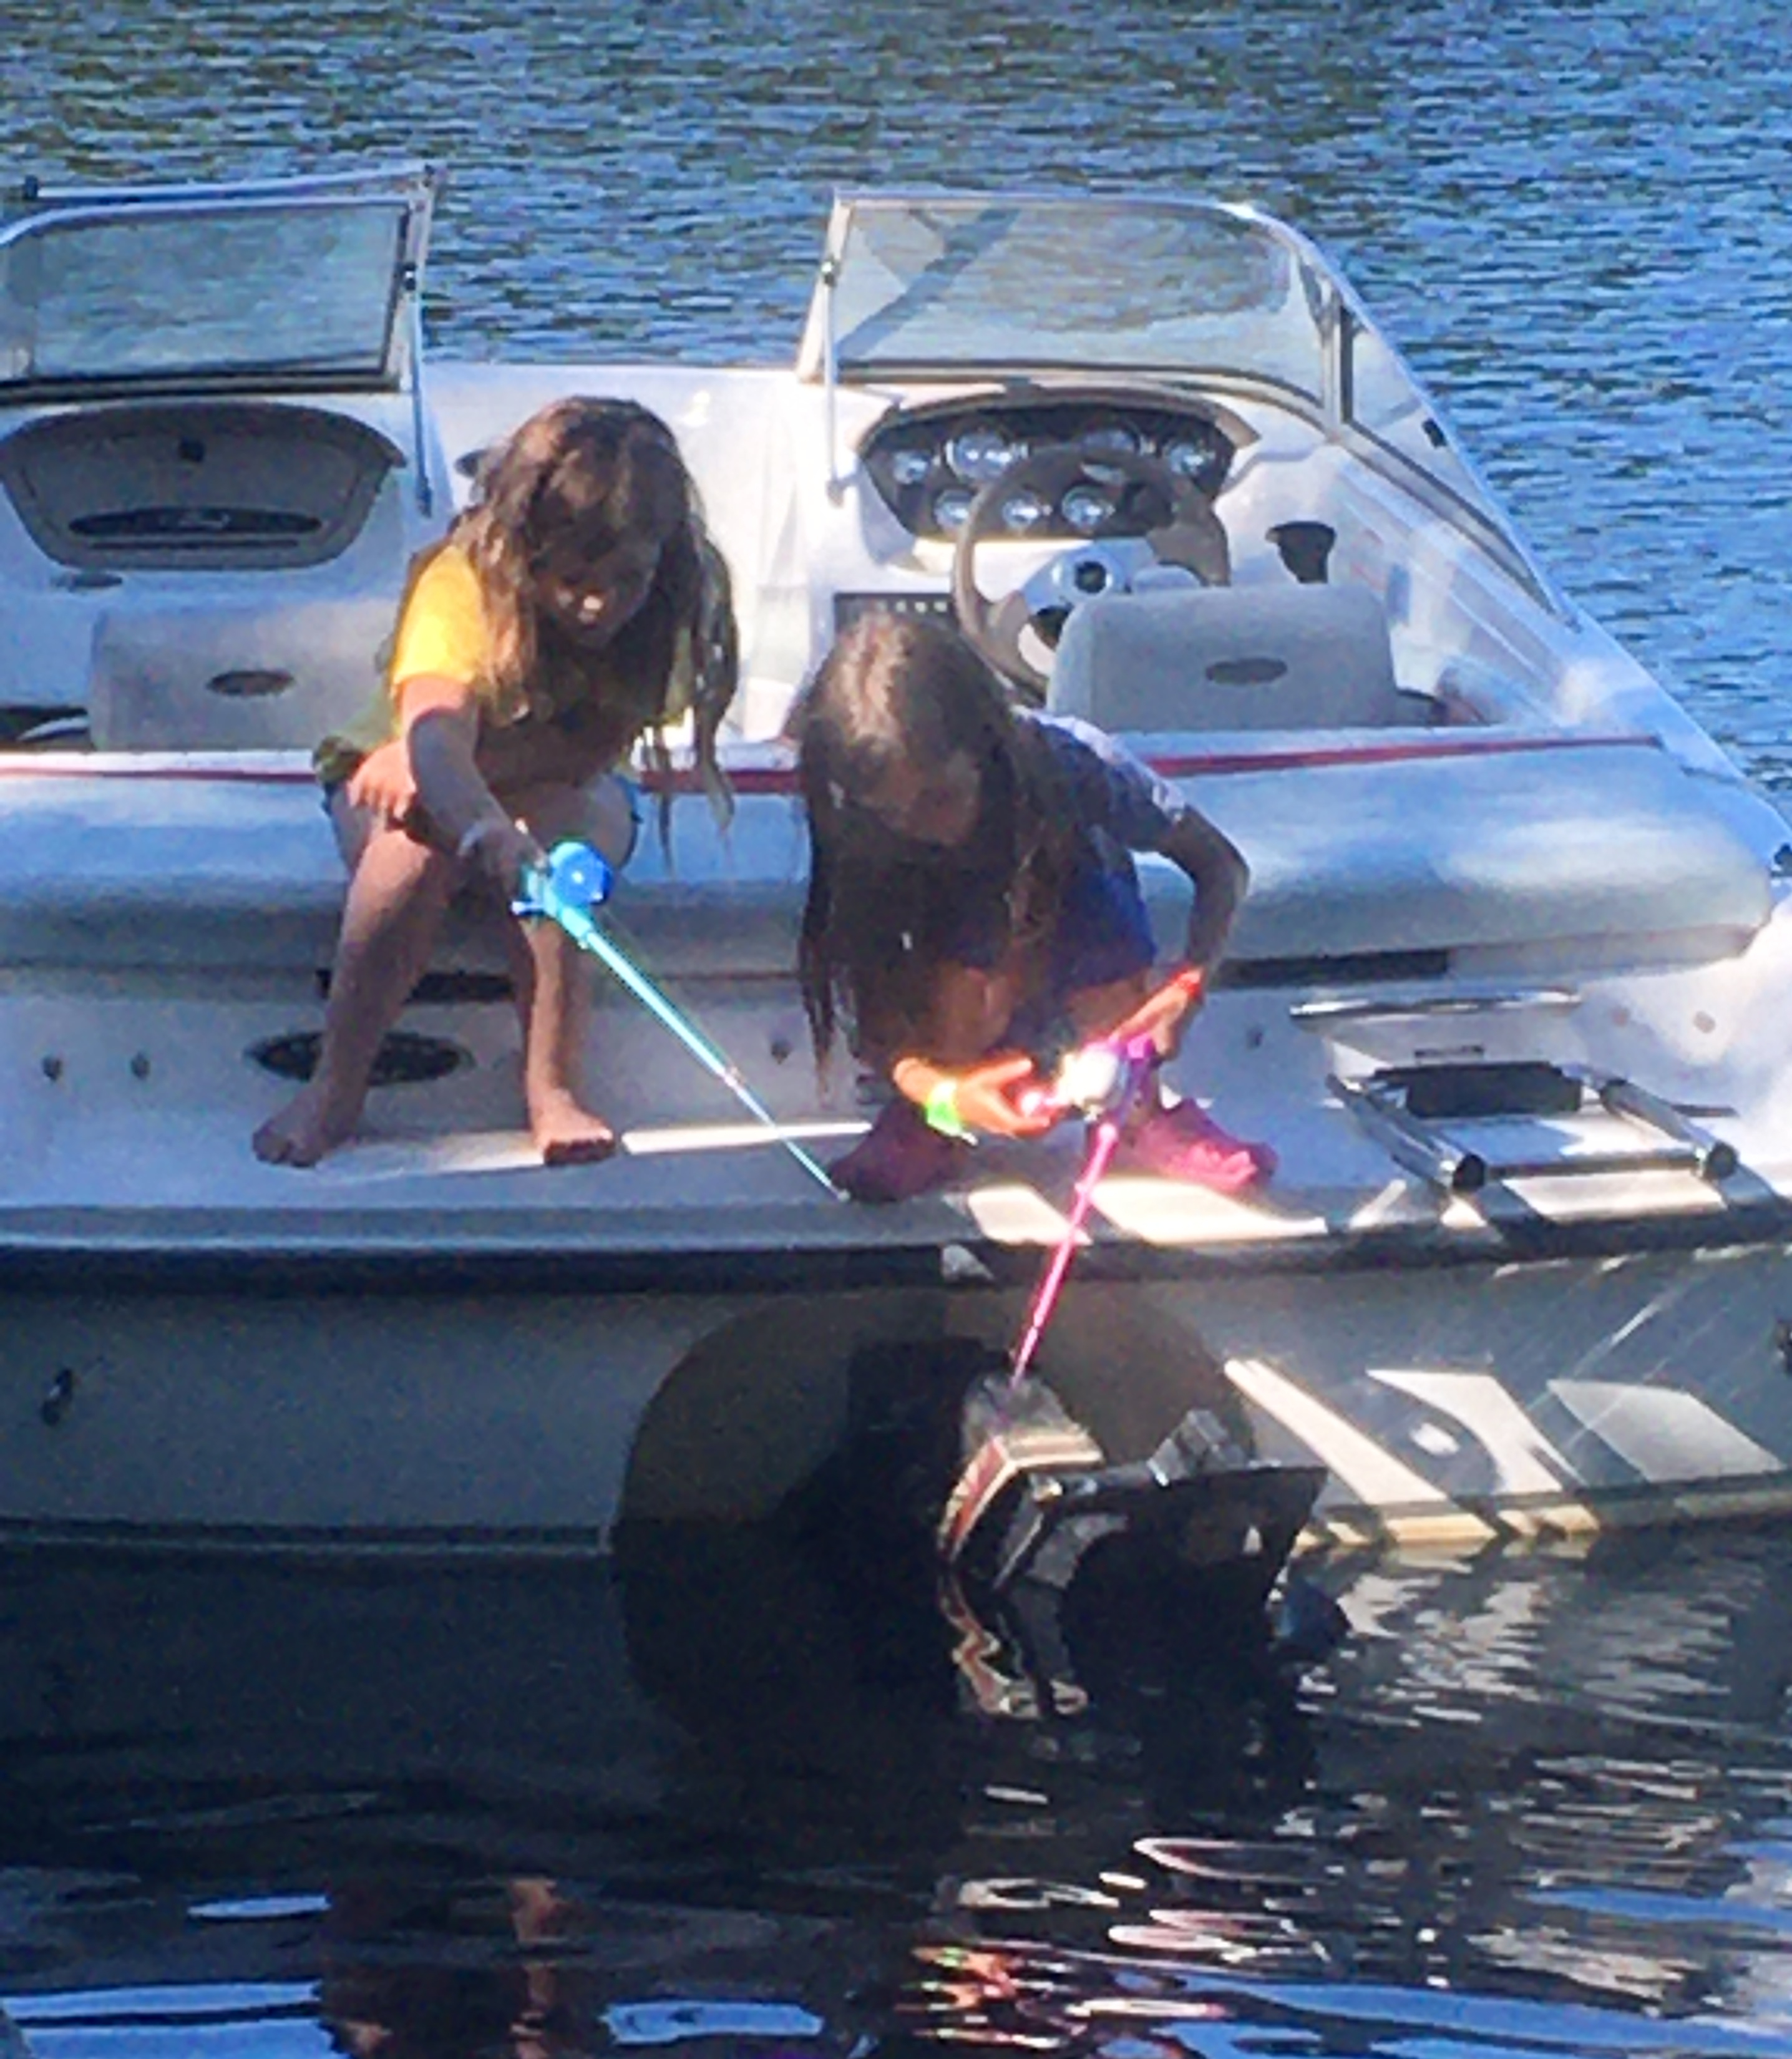 E and her friend sitting on the back of the motorboat with plastic fishing rods.